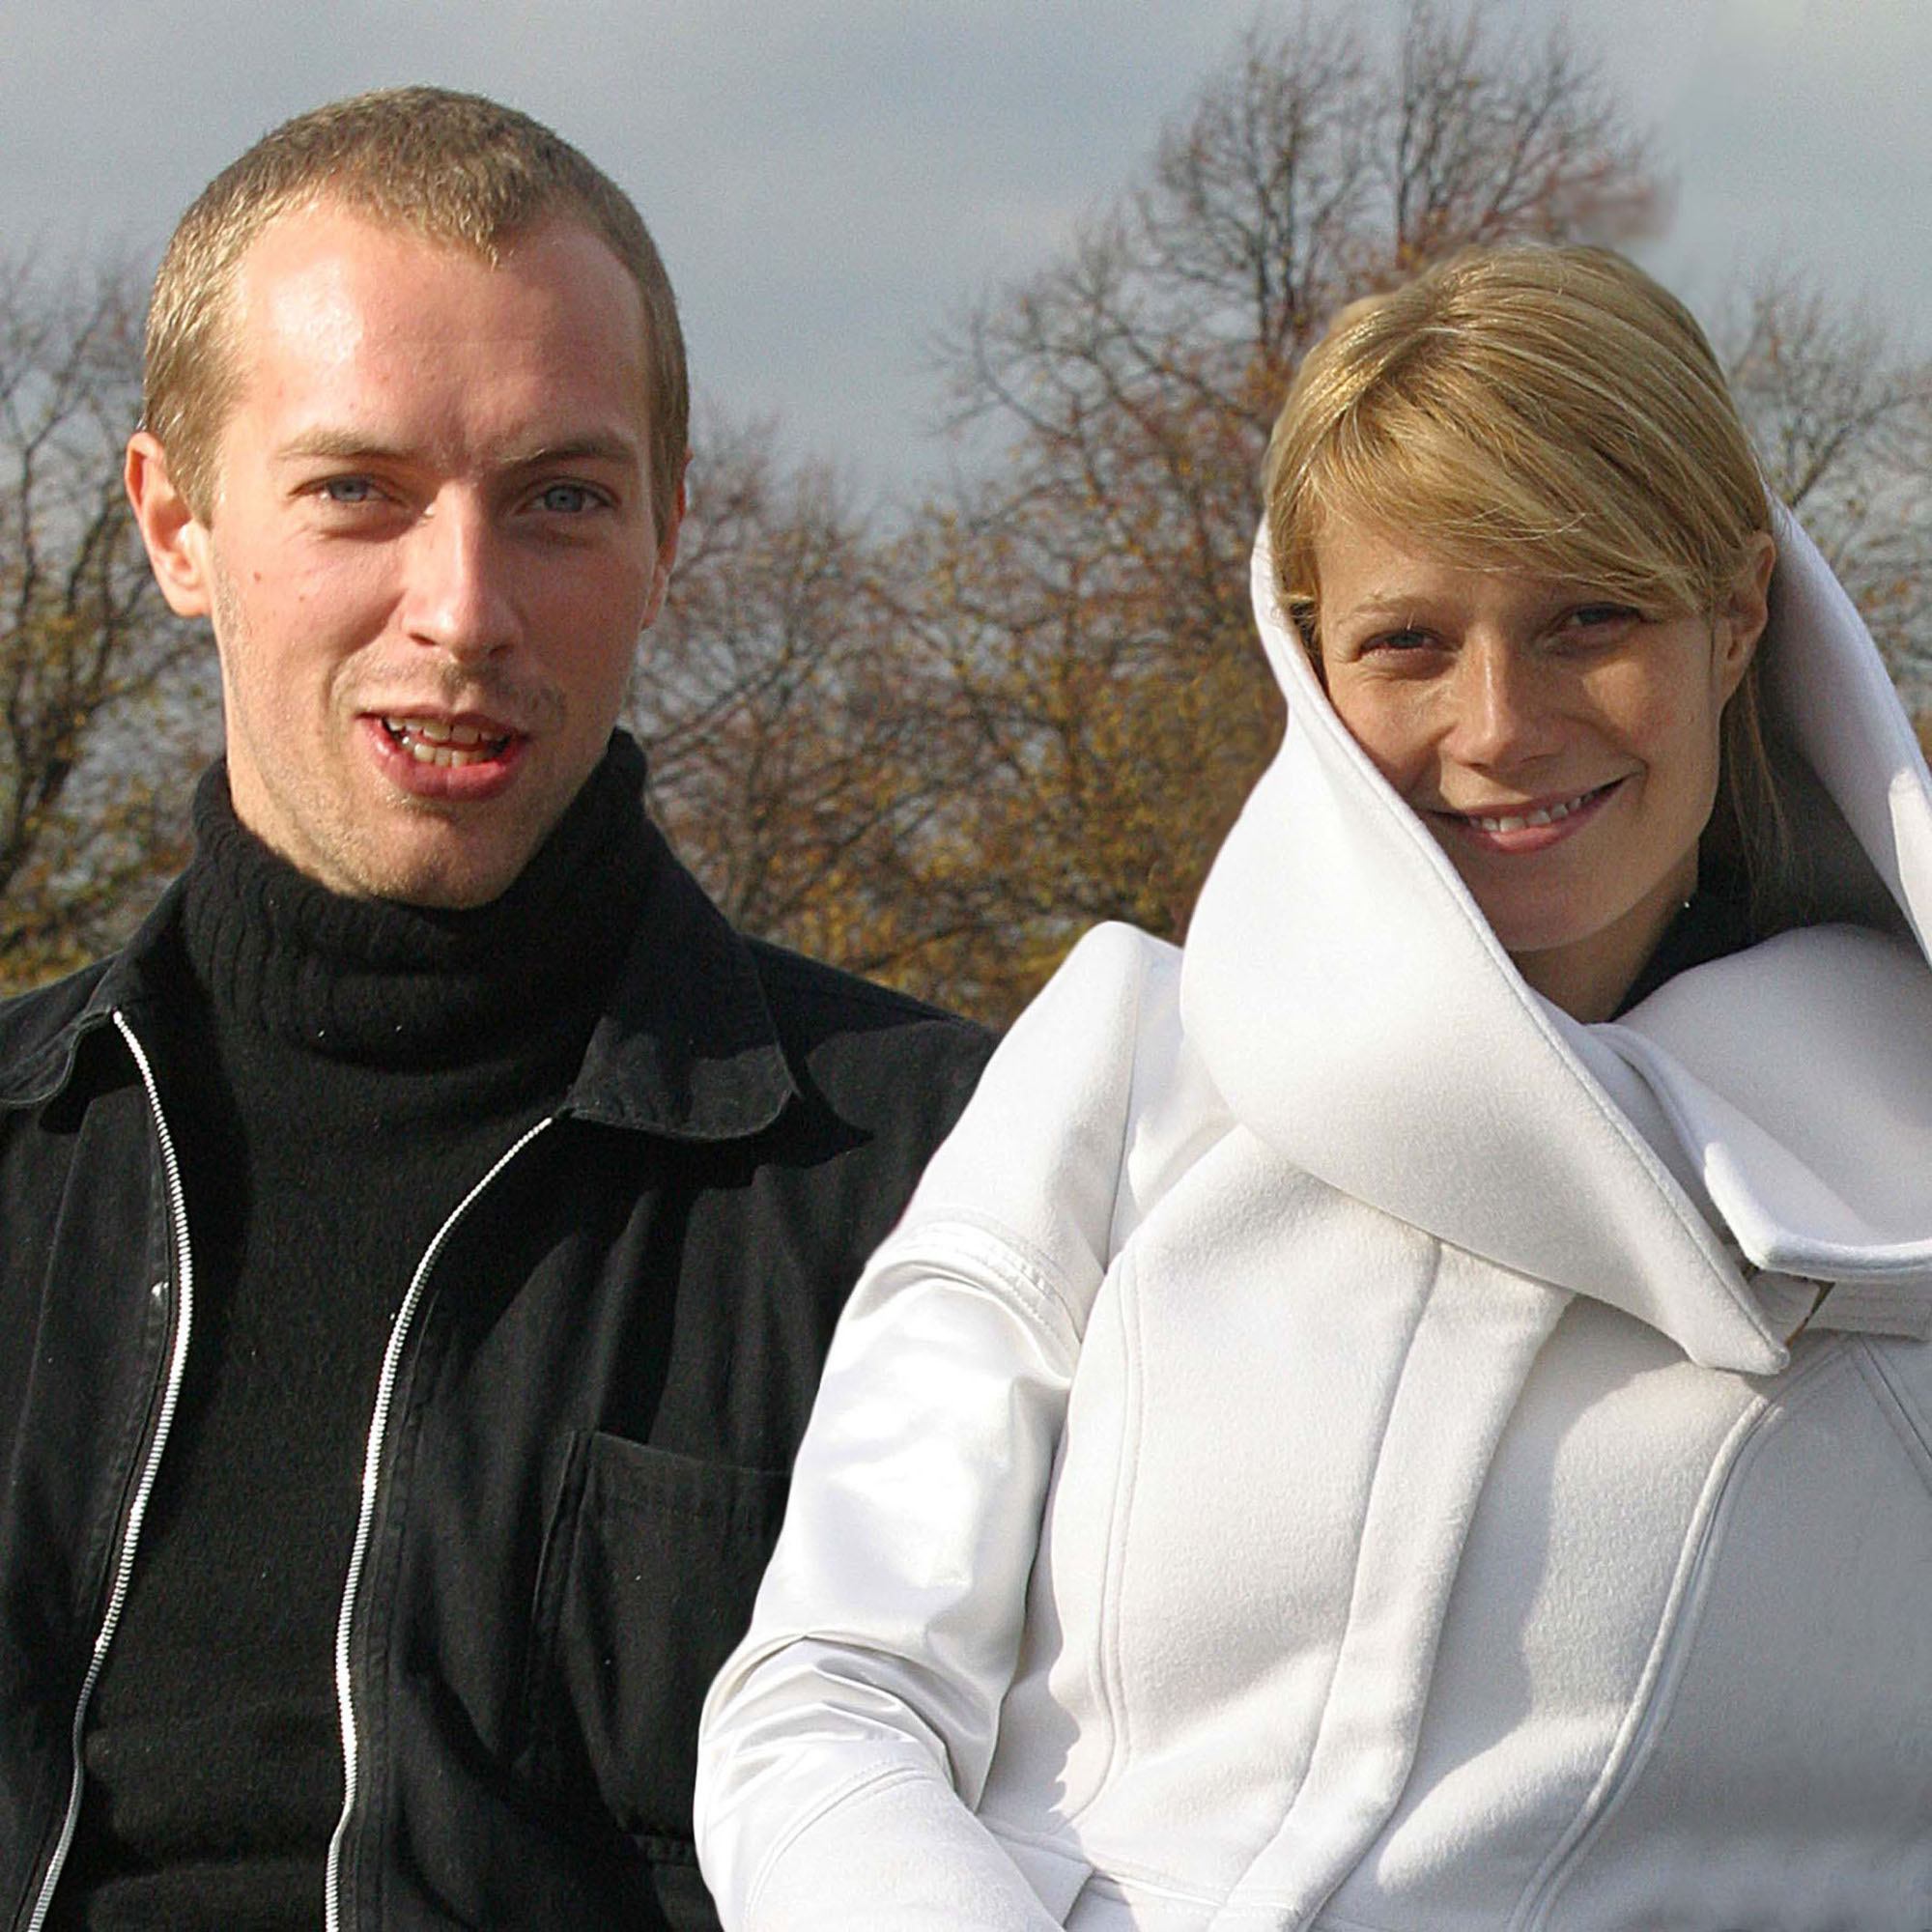 26.MARCH.2014

**STOCK IMAGES**

GWYNETH PALTROW AND CHRIS MARTIN SPLIT AFTER TEN YEARS OF MARRIAGE!

THE ACTRESS TOOK TO HER WEBSITE 'GOOP' TO ANNOUCE HER SPLIT HER ROCKER HUSBAND!


23RD NOVEMBER 2003 - HAMPSTEAD - LONDON - UK

CHRIS MARTIN AND GIRLFRIEND GWYNETH PALTROW SEEN IN HAMPSTEAD PARK IN LONDON!,Image: 188586958, License: Rights-managed, Restrictions: PLEASE CREDIT USAGE PER BYLINE *NO WEB USAGE UNLESS AGREED. PLEASE TELEPHONE 020 7377 2770*, Model Release: no, Credit line: CH1 / Backgrid UK / Profimedia